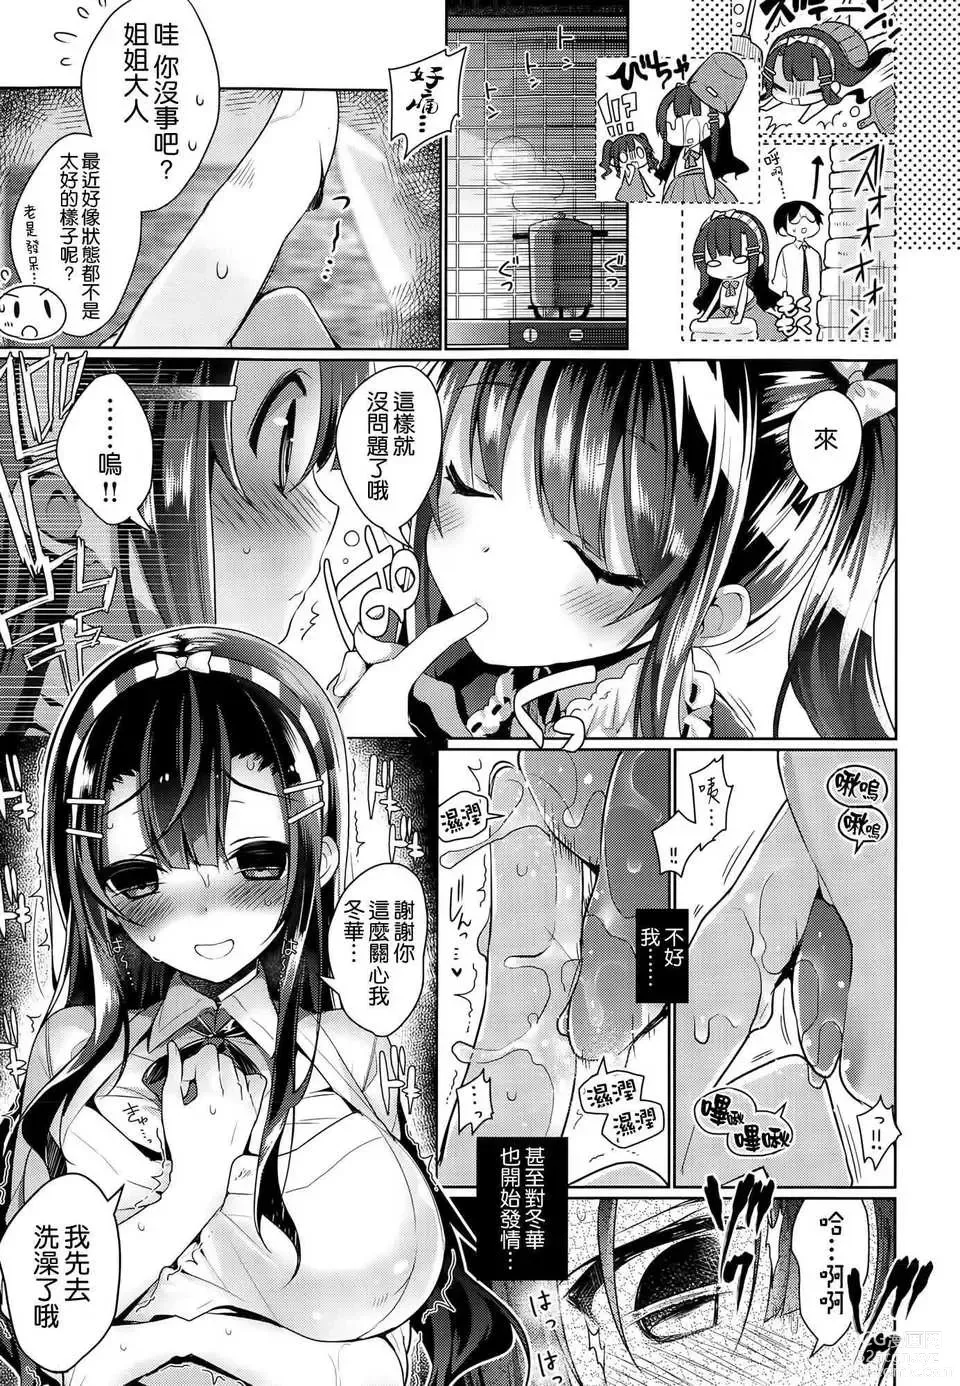 Page 9 of manga Aki na Dere - Mysterious the forbidden carnal relationship